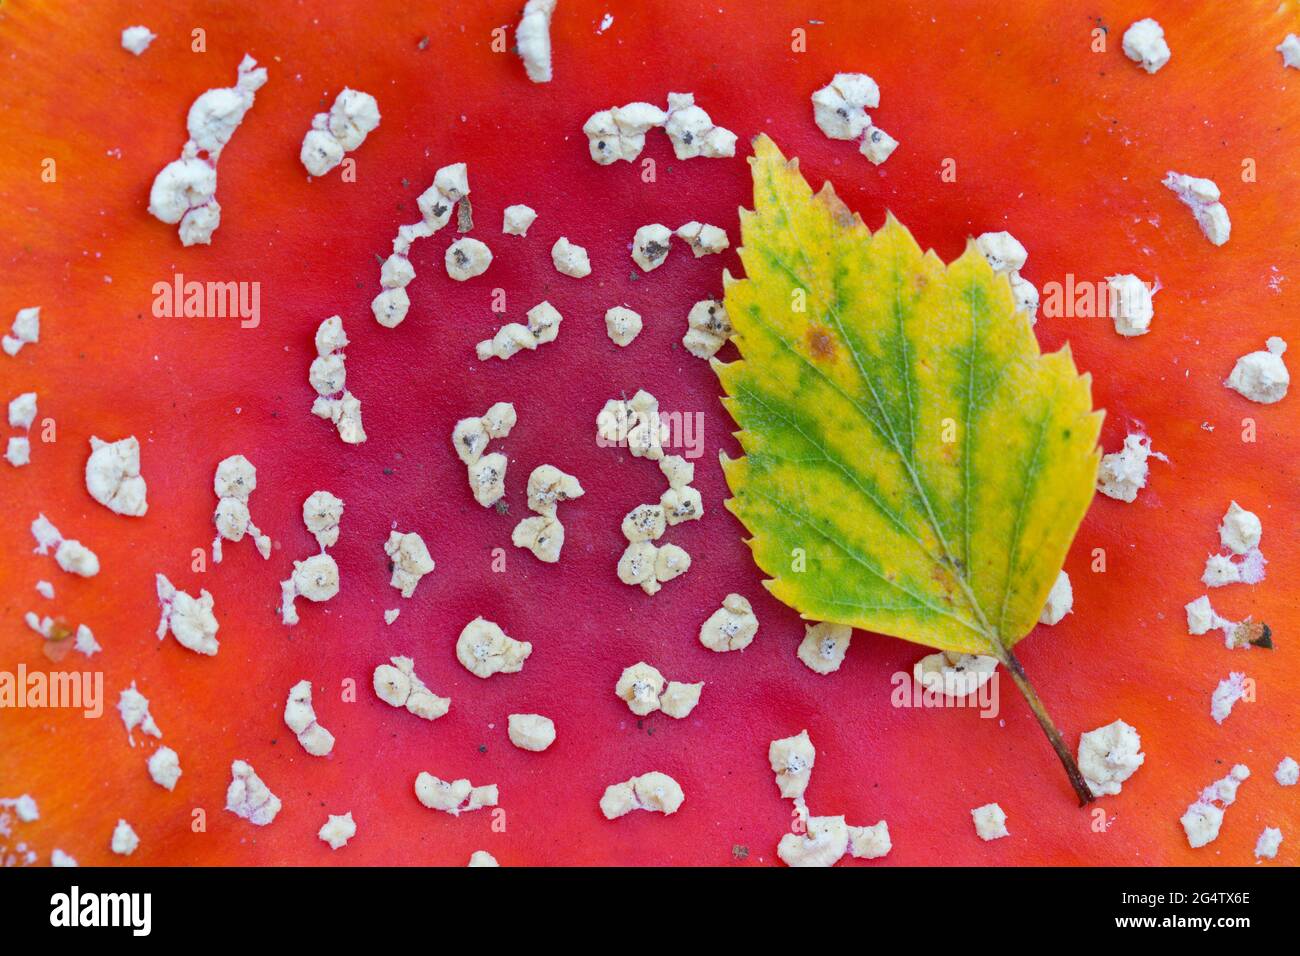 Fallen downy birch / European white birch leaf showing autumn colours resting on cap of fly agaric / fly amanita mushroom (Amanita muscaria) Stock Photo